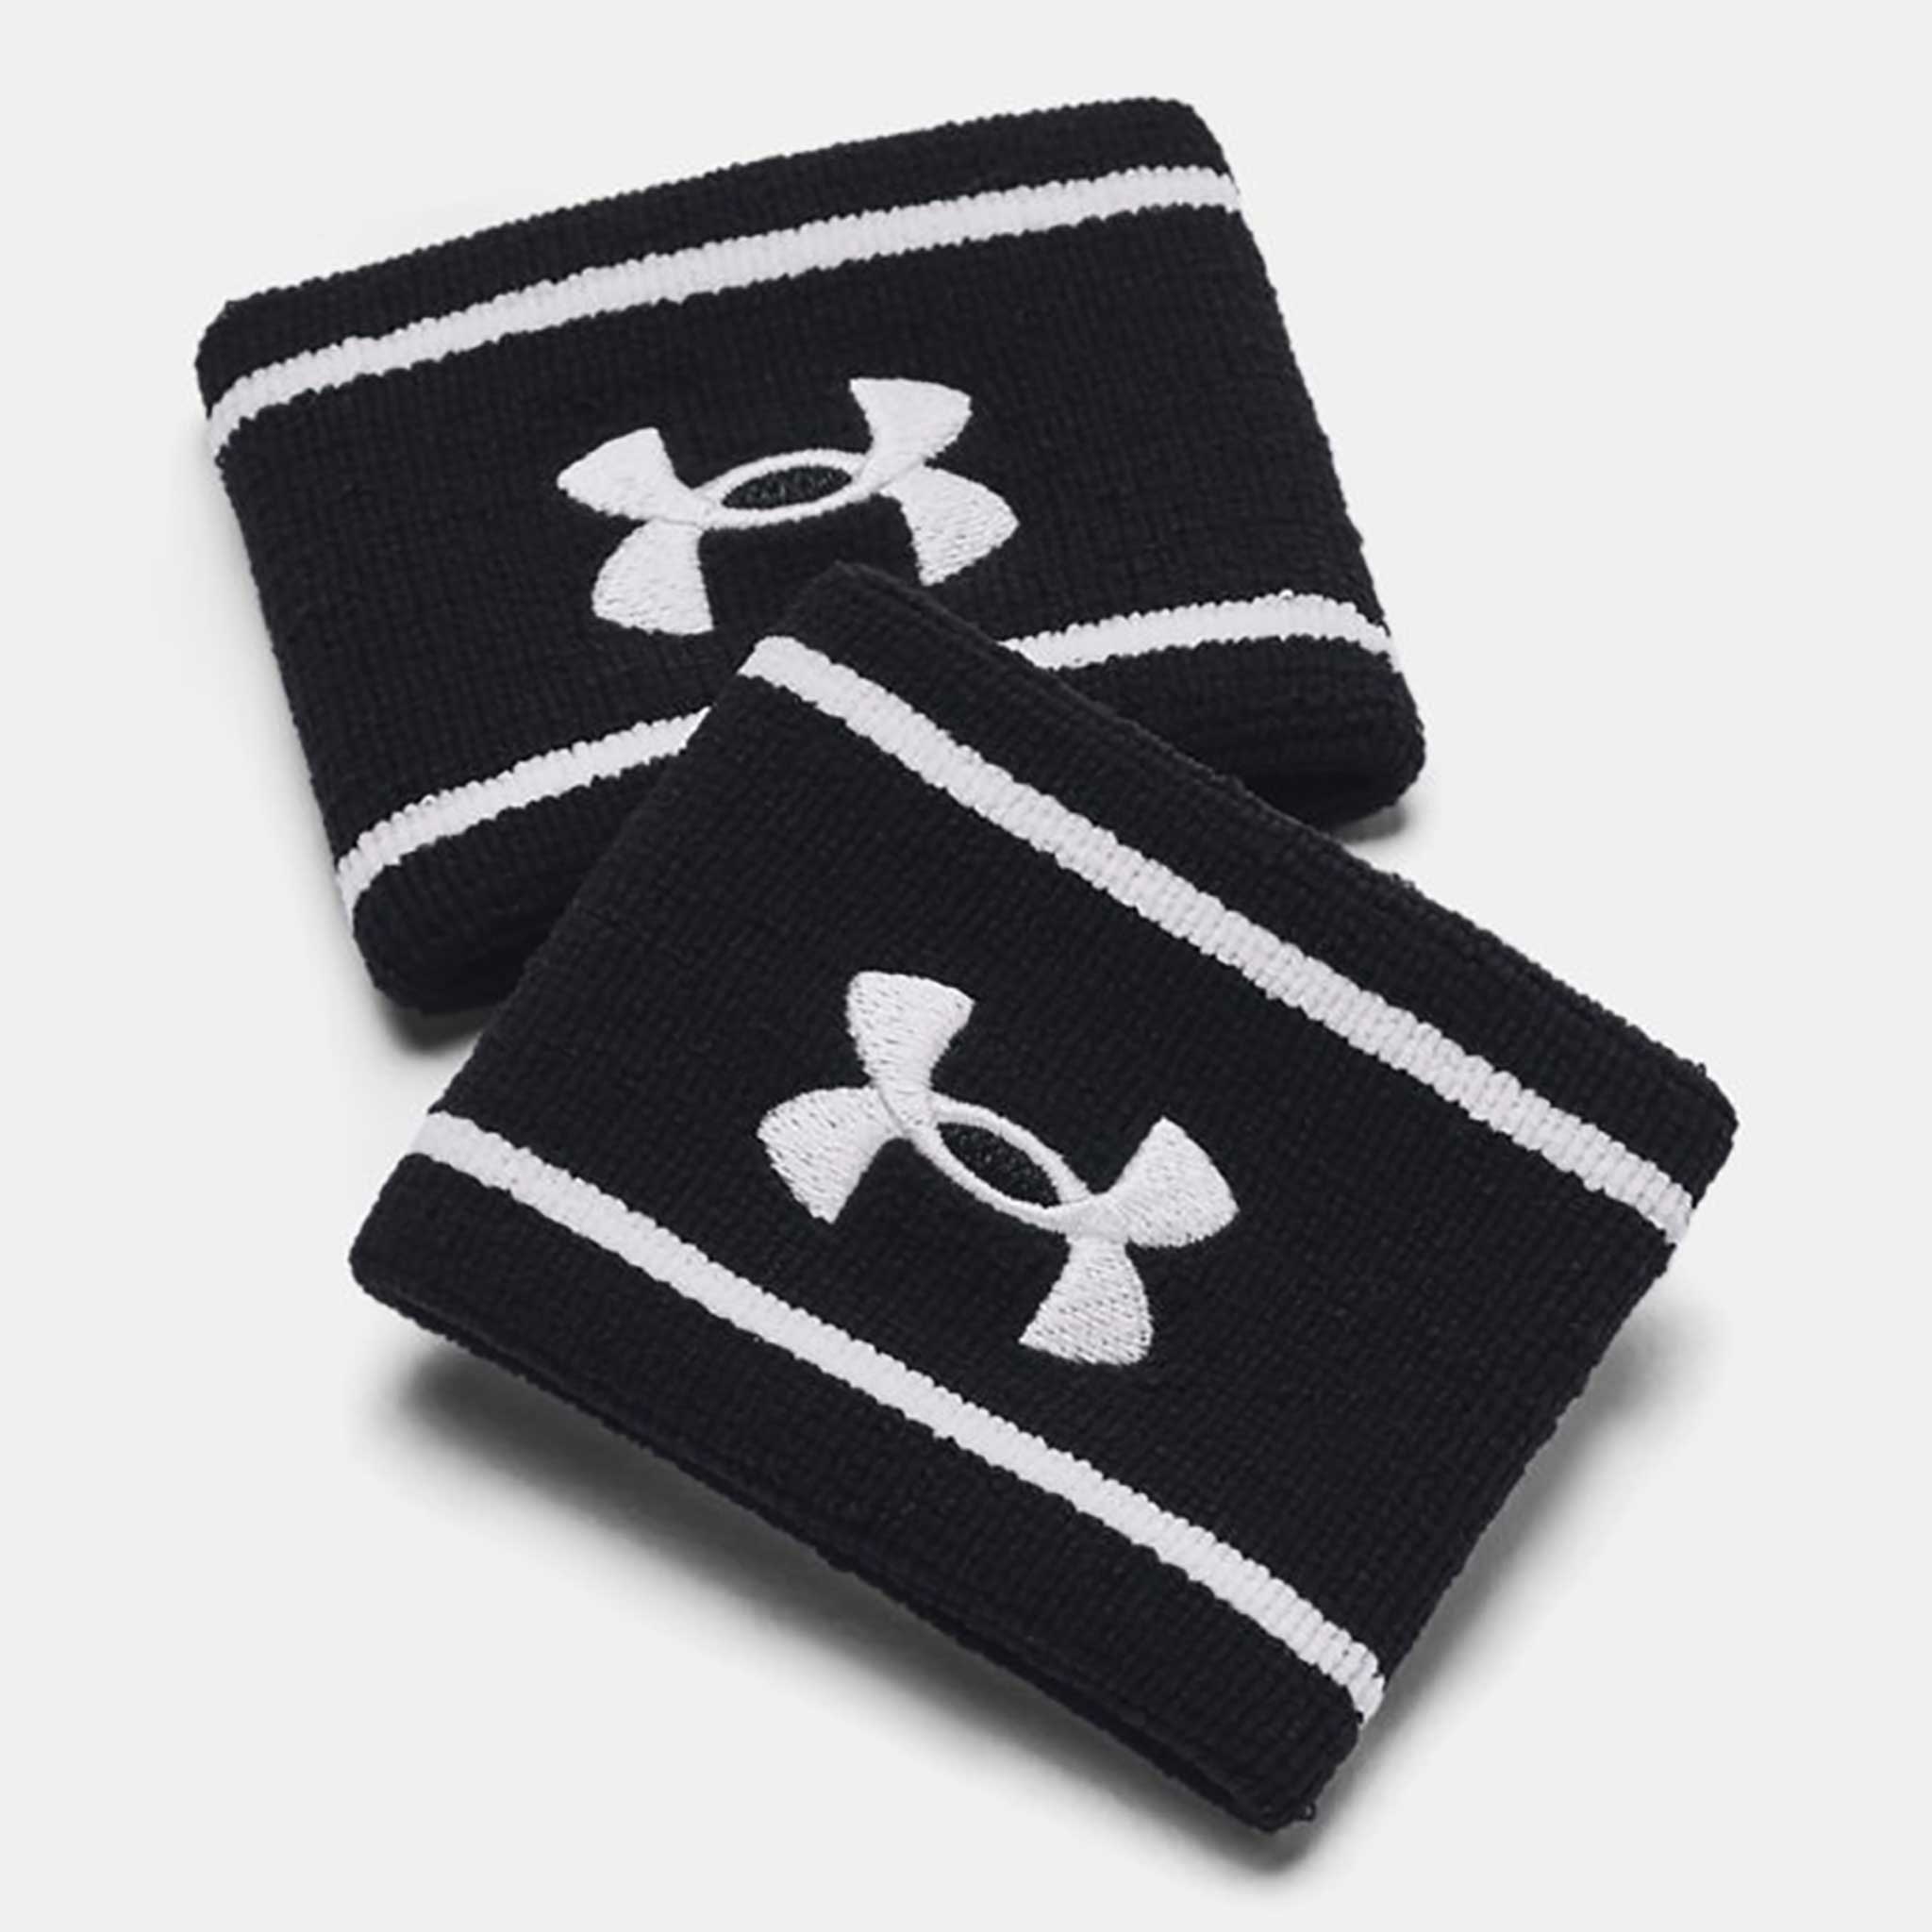 Under Armour Striped Performance Terry Wristbands (2 Pack)